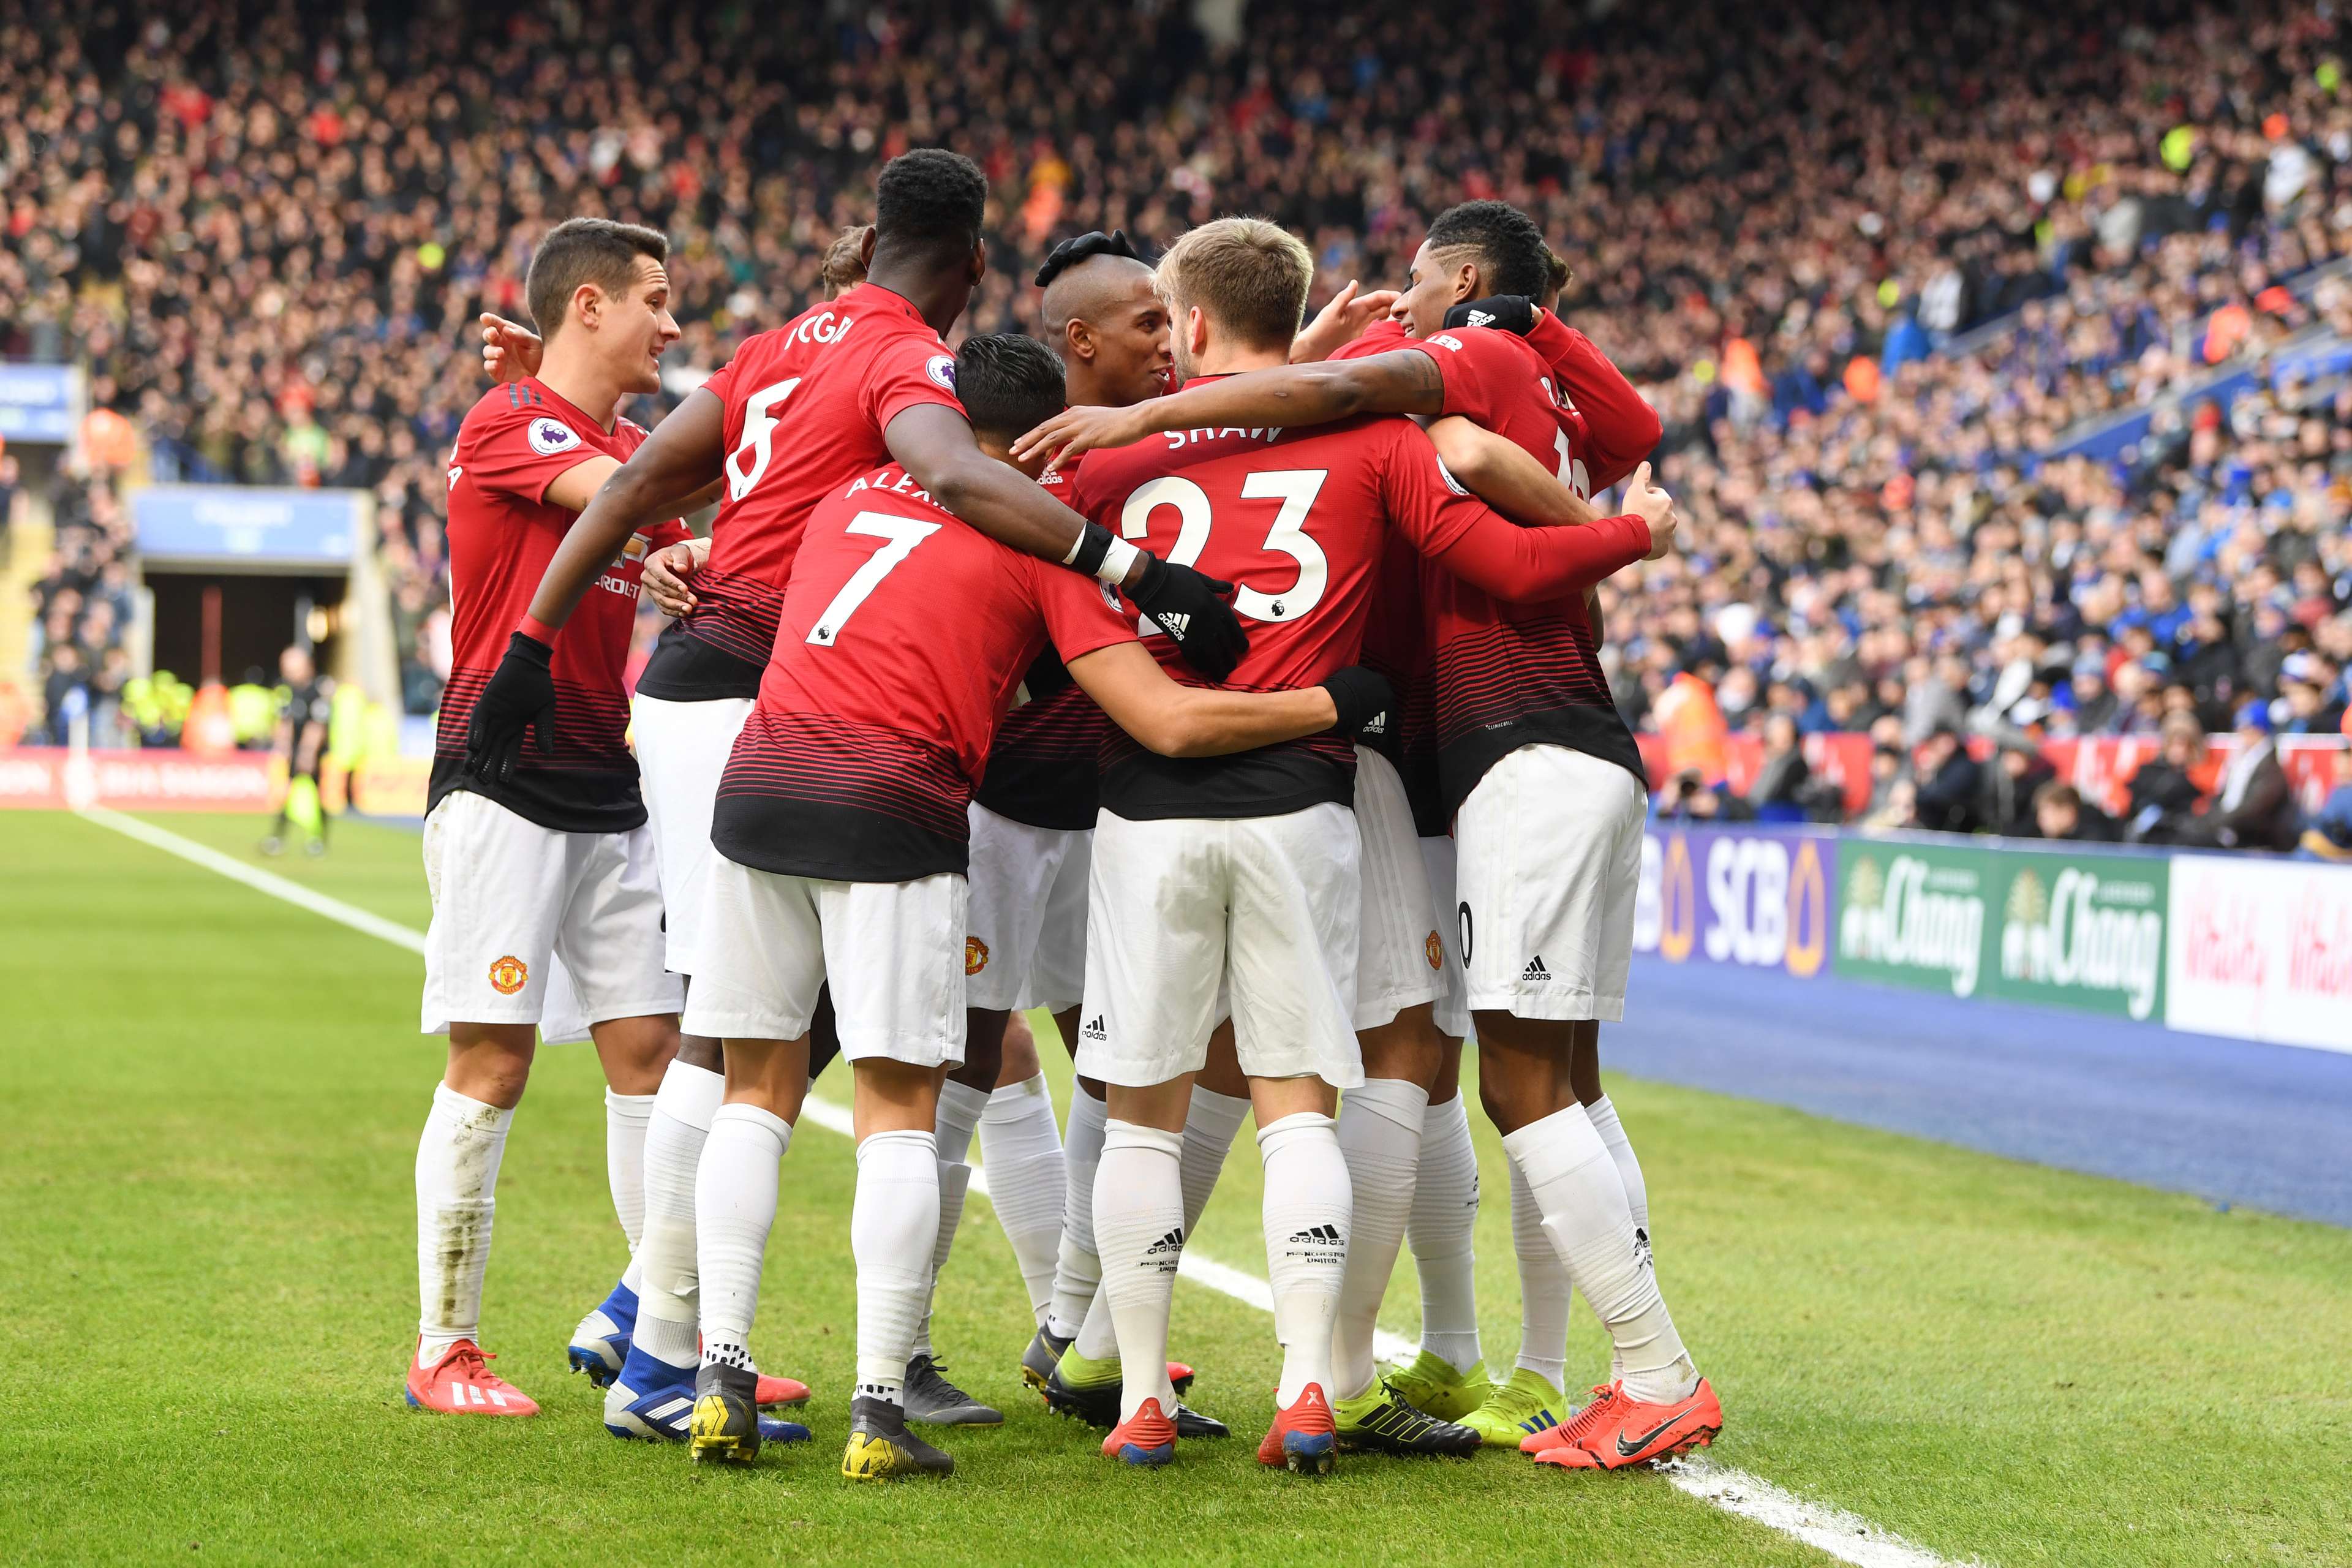 Manchester united Leicester city 02032019